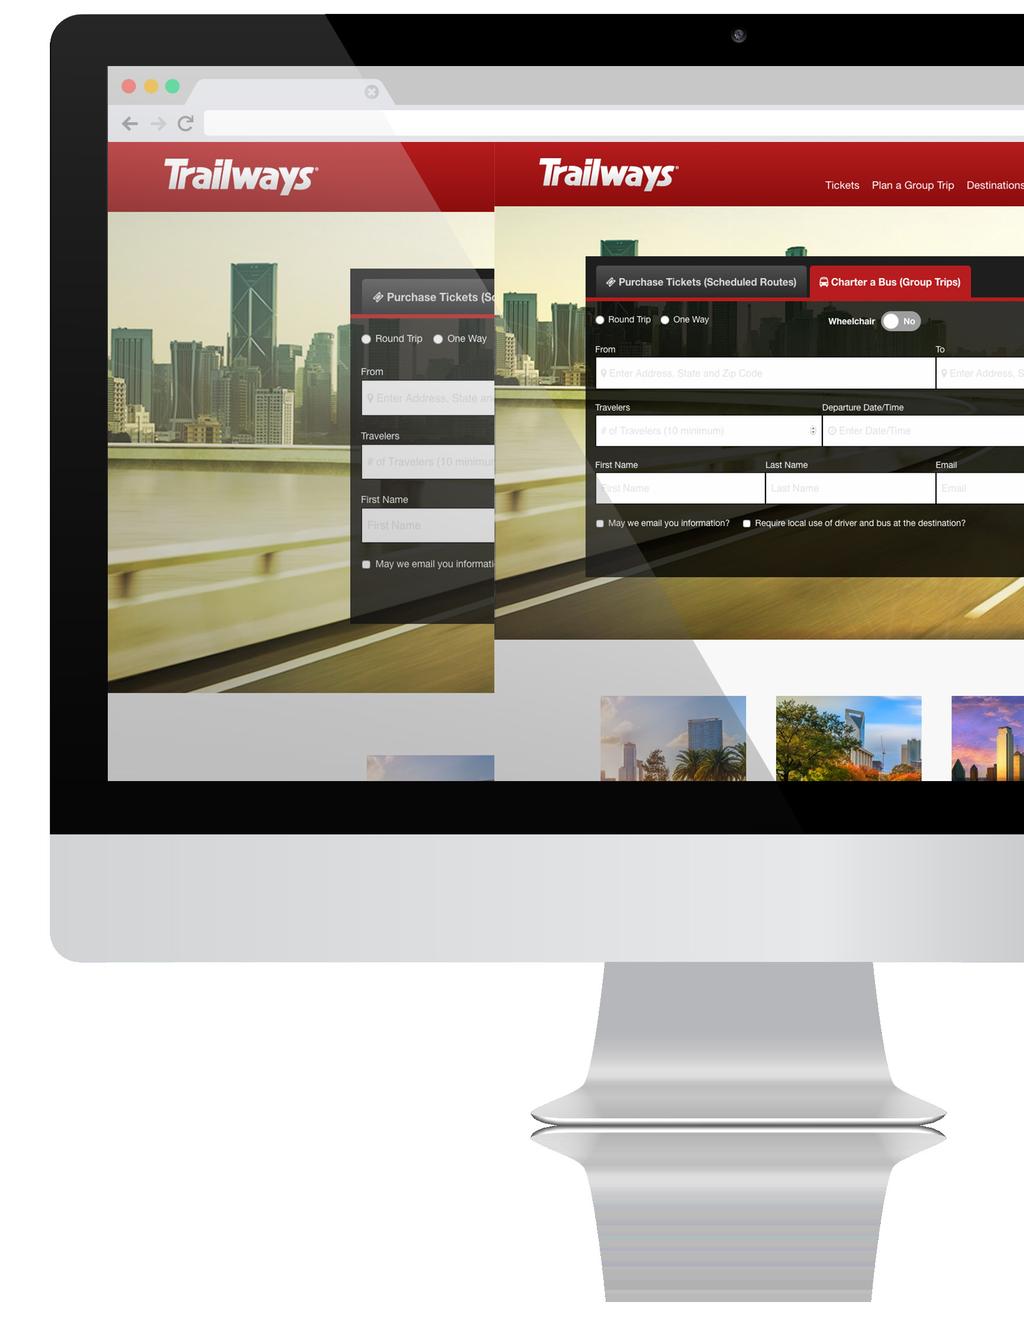 Driving Charter Sales The Trailways charter lead system generates